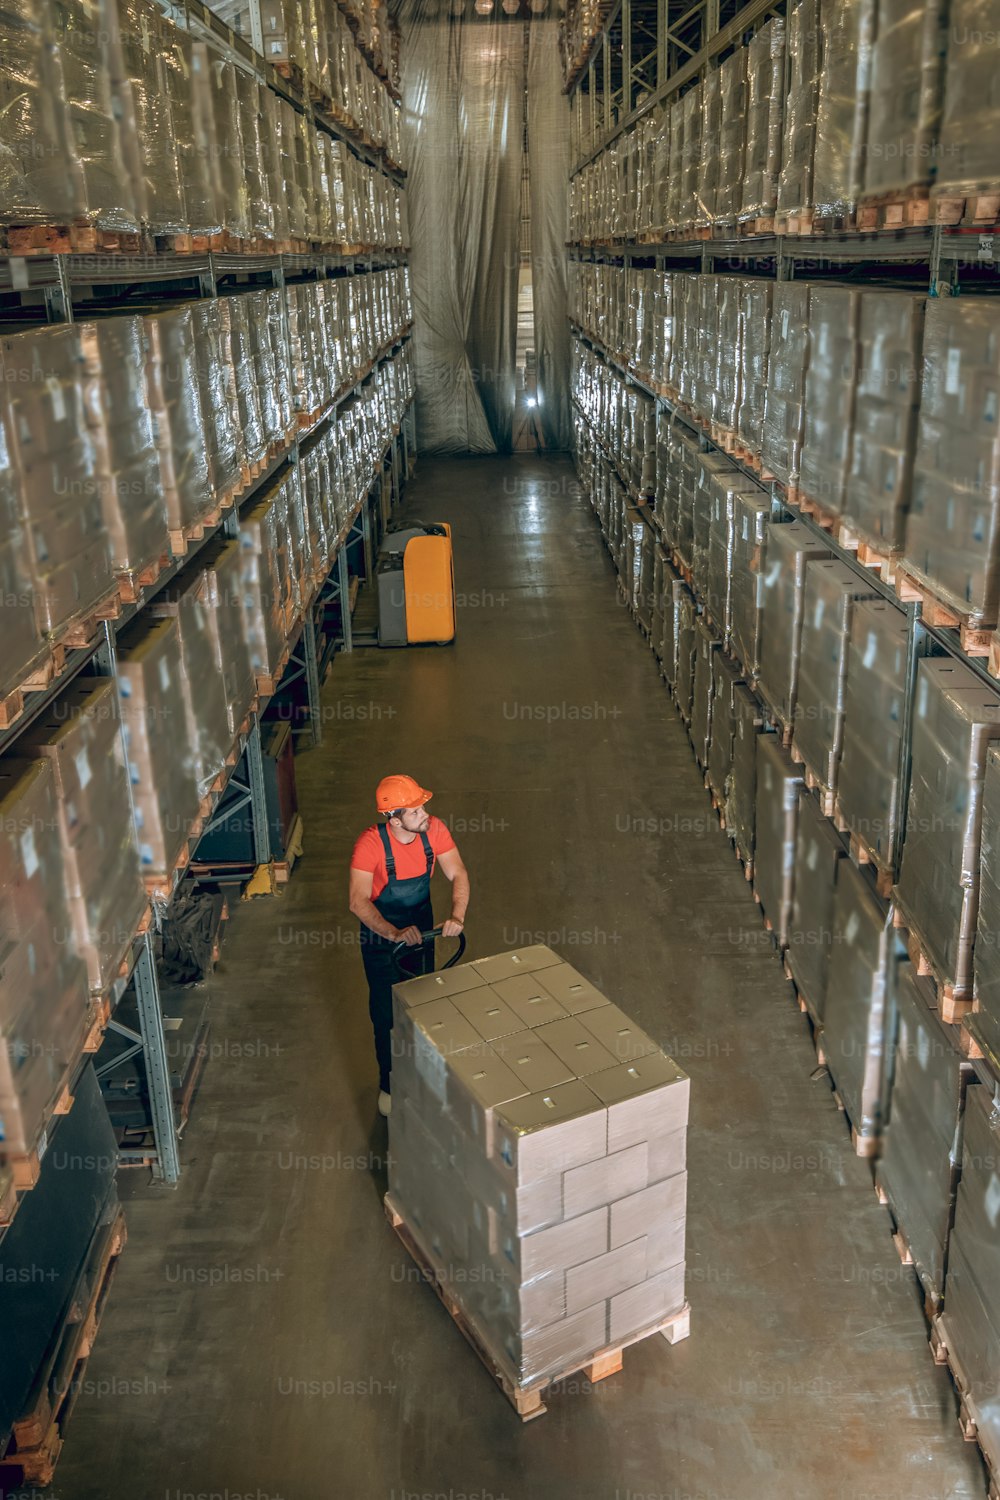 Warehouse. View of a person in a storage compartment with lots of containers on the shelves